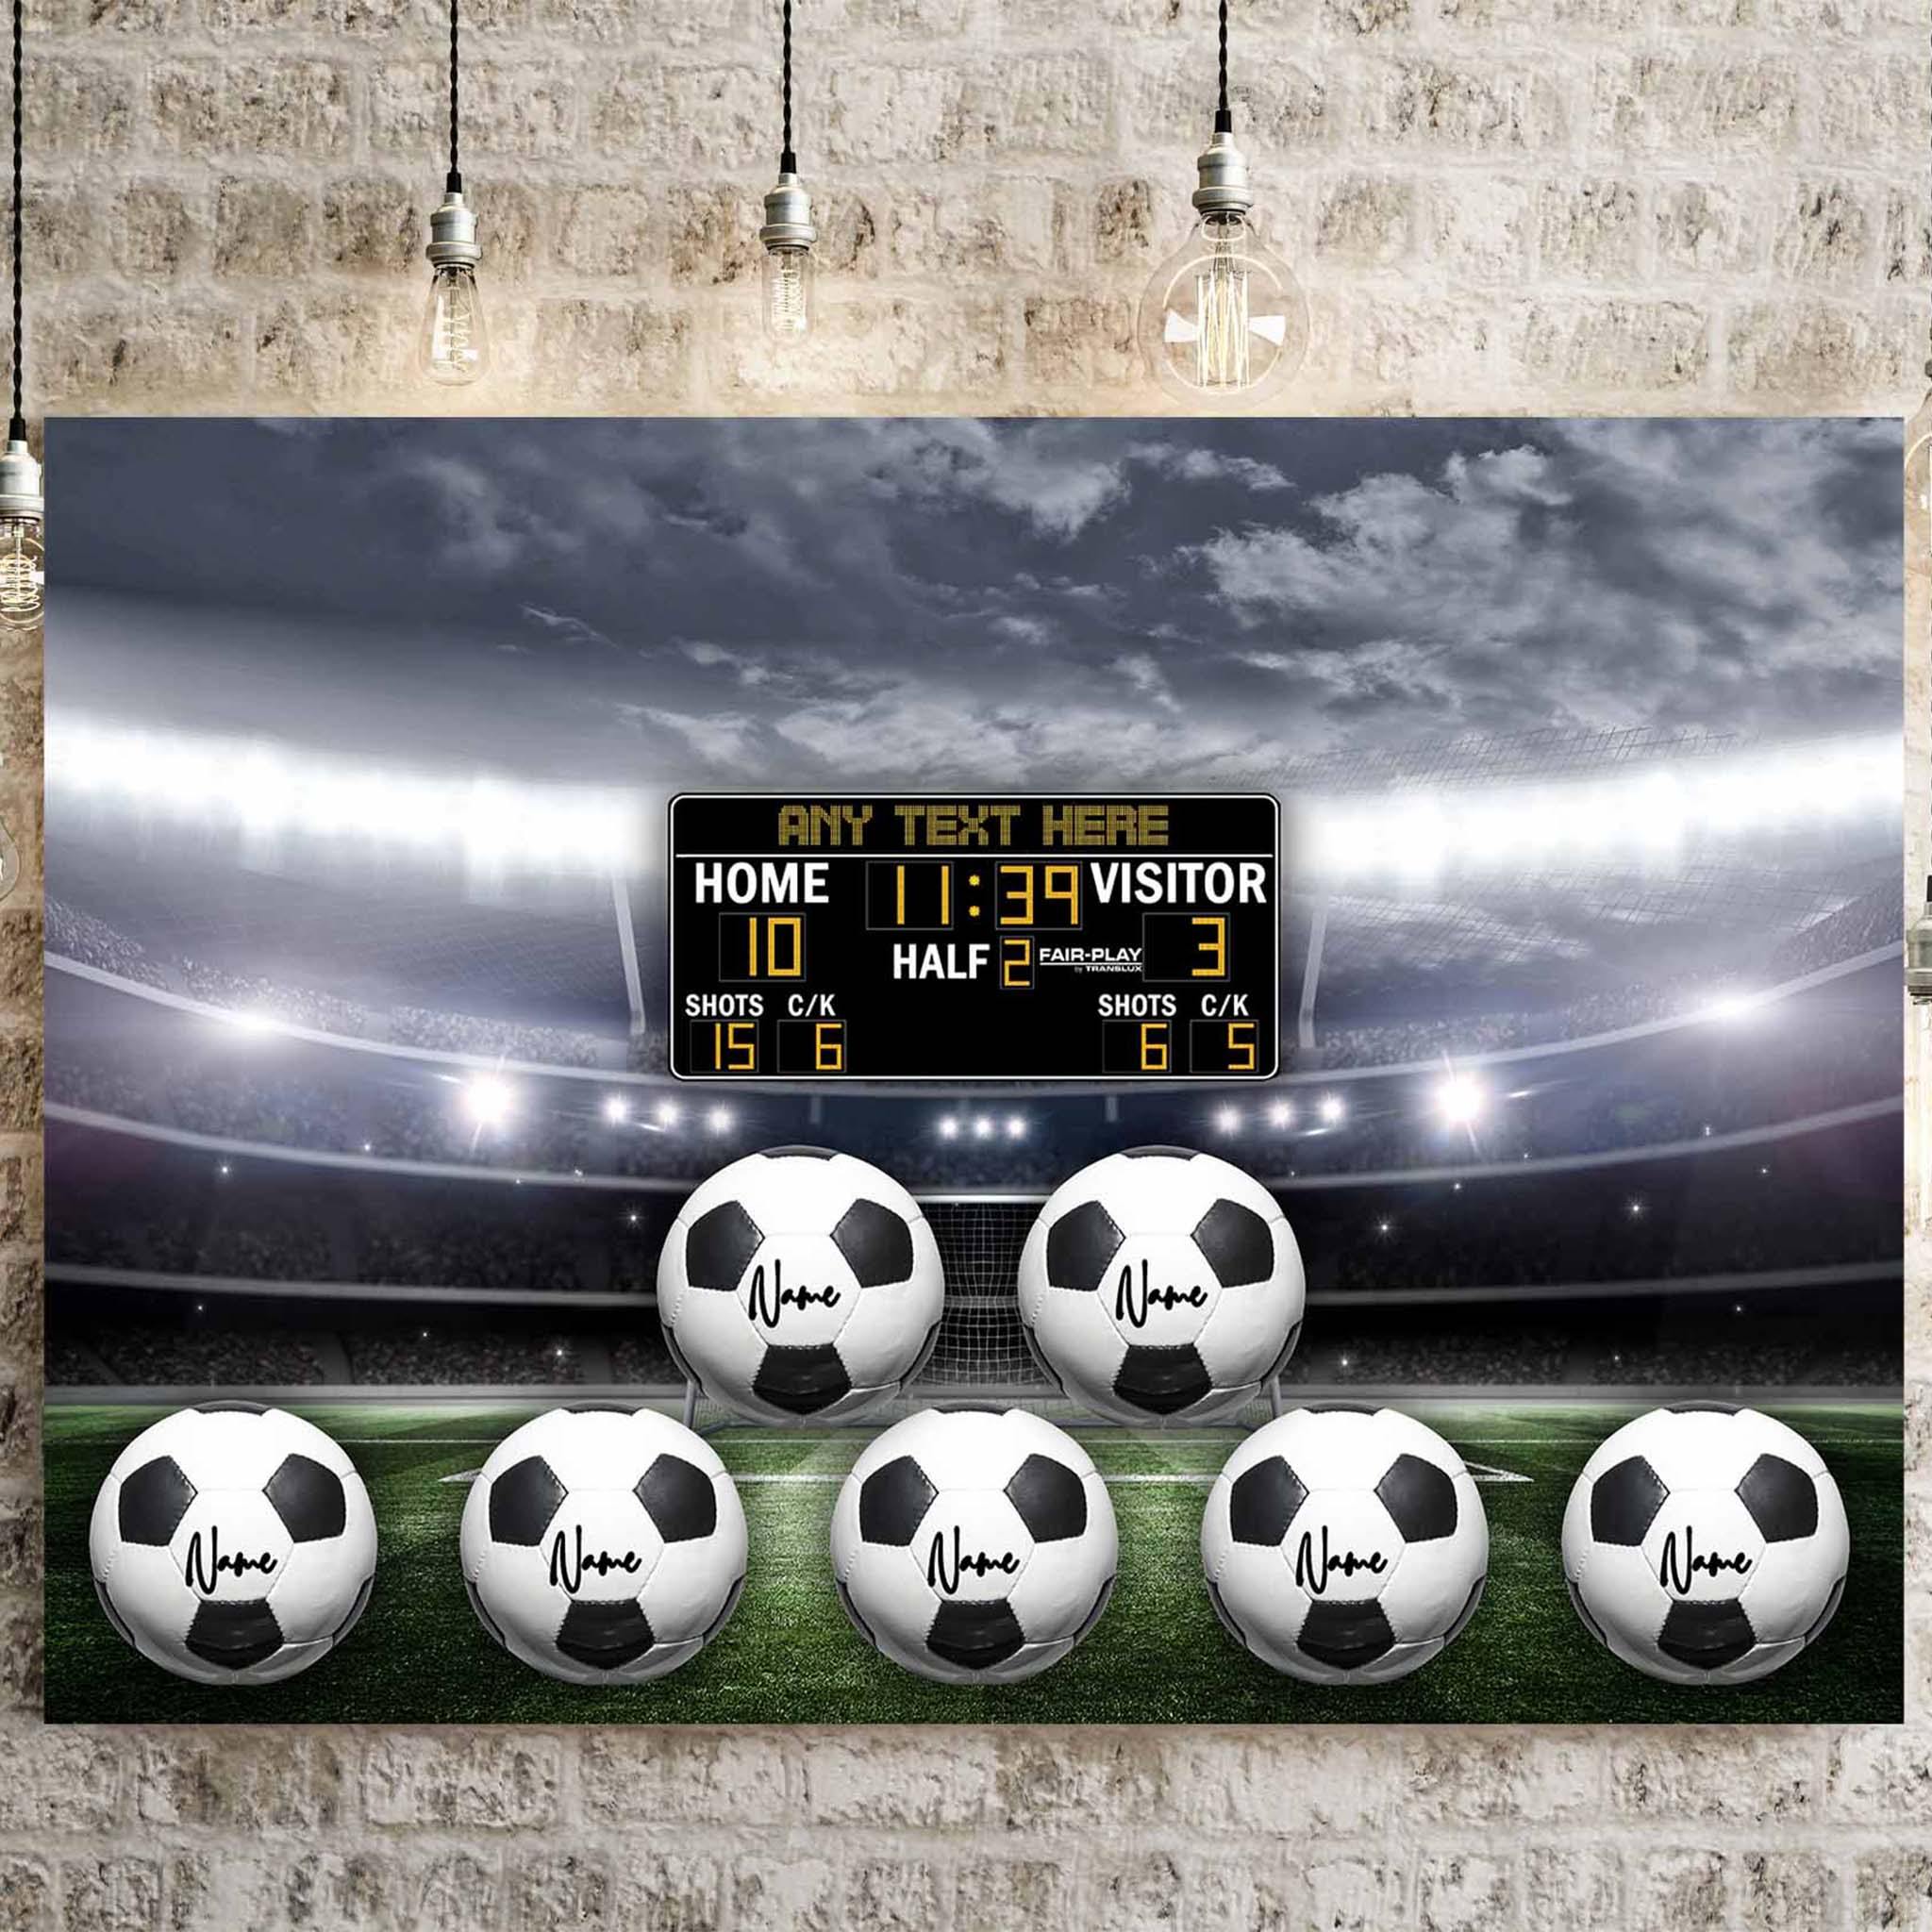 Soccer Stadium V1 Multiple Names Personalized Balls And Scoreboard CanvasCustomly Gifts